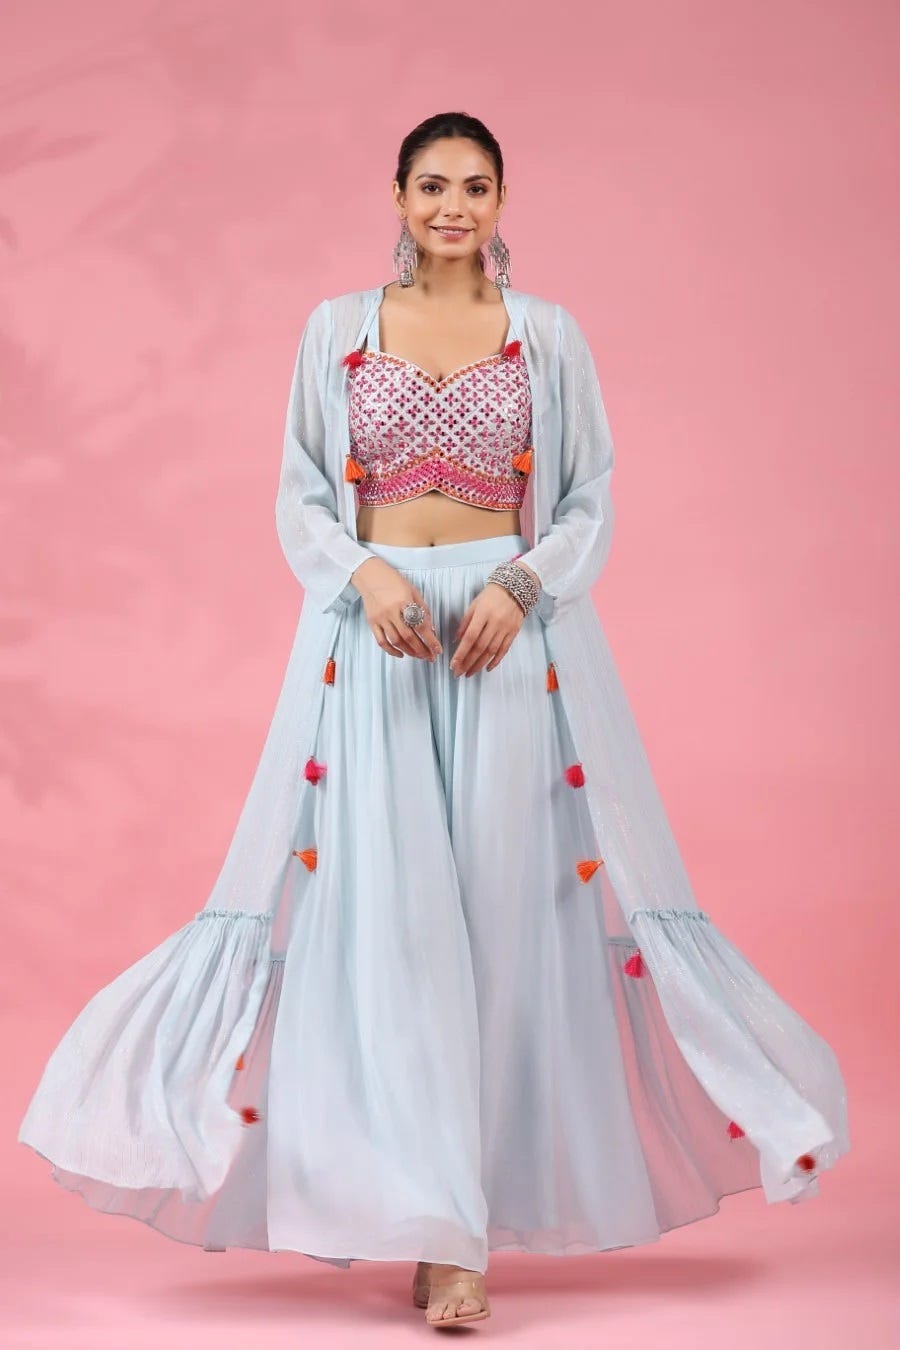 Fusion wear outfits for women in India - Folklore Collection